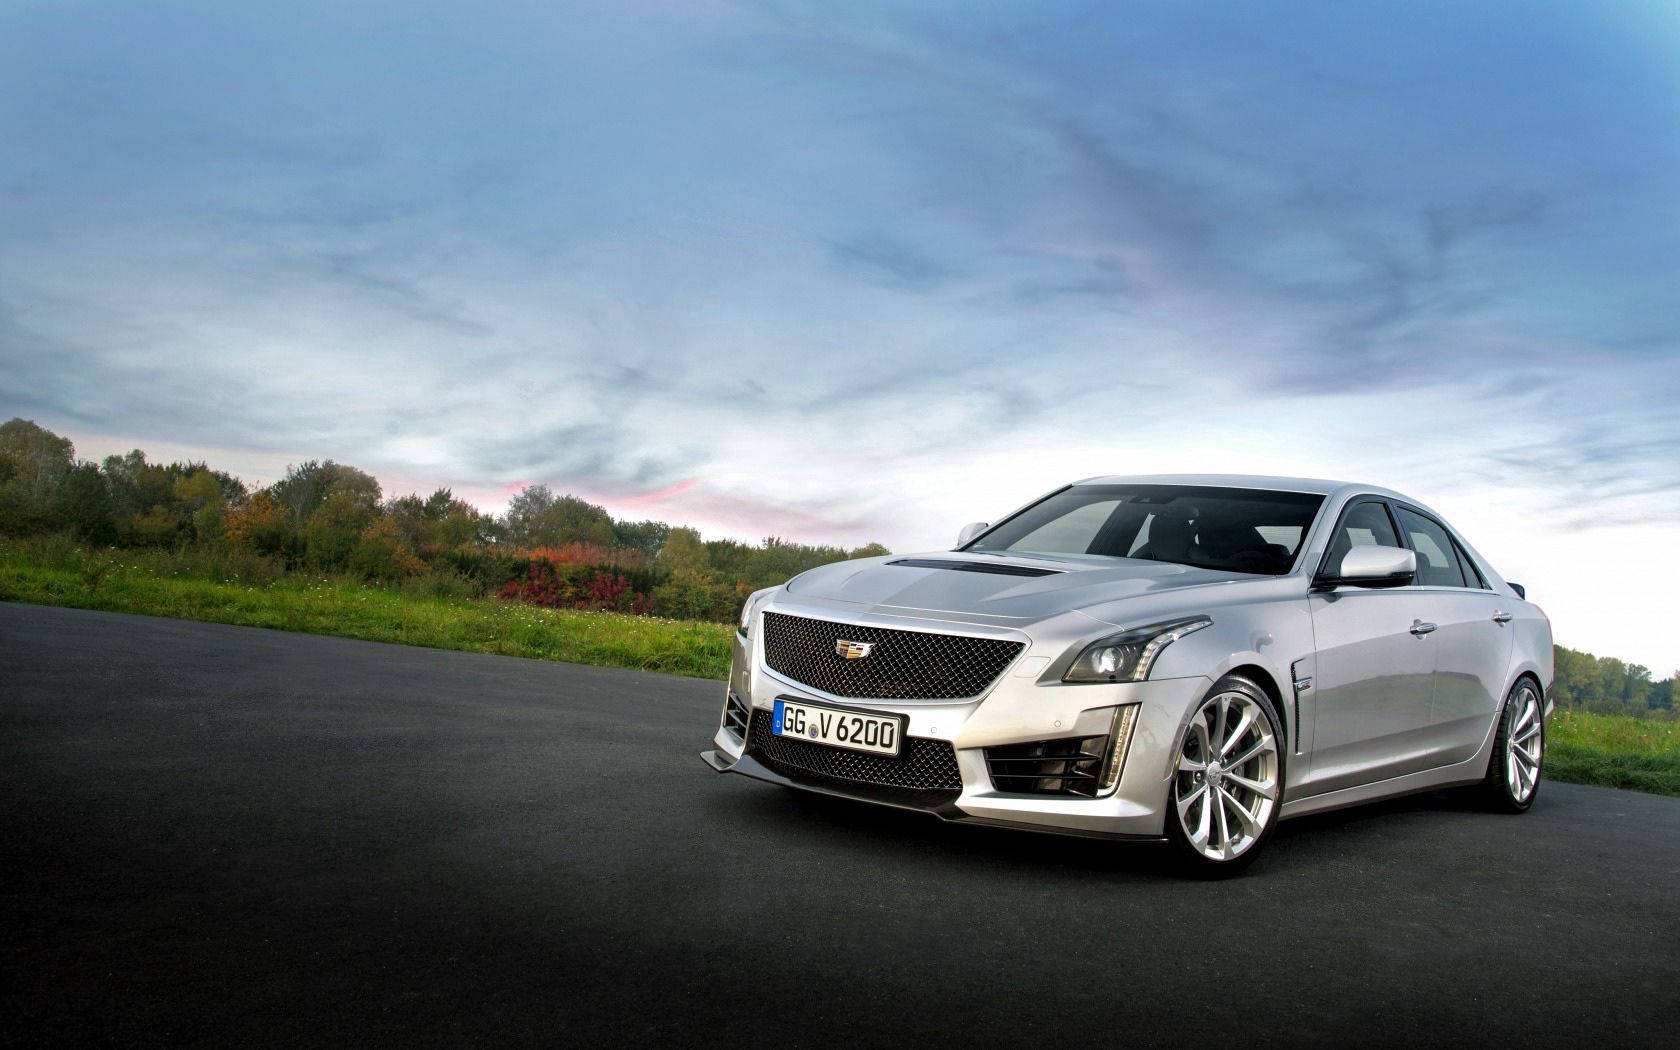 Silver Cadillac Cts Coupe Wallpaper